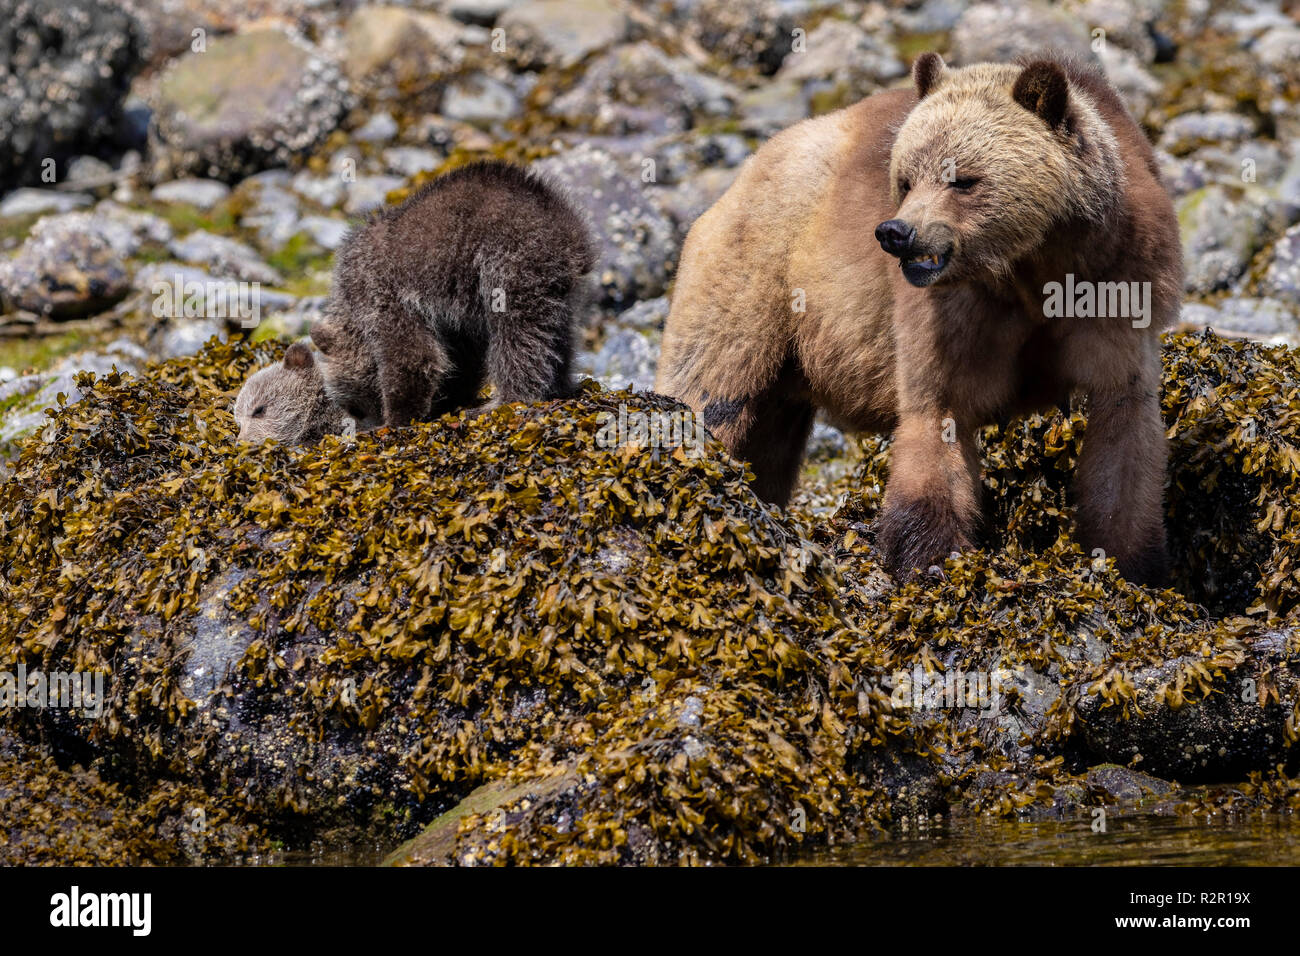 Grizzly bear (Ursus arctos horribilis) sow with two cubs feasting along the shoreline at low tide in Glendale Cove, Knight Inlet, First Nations Territory, British Columbia, Canada Stock Photo